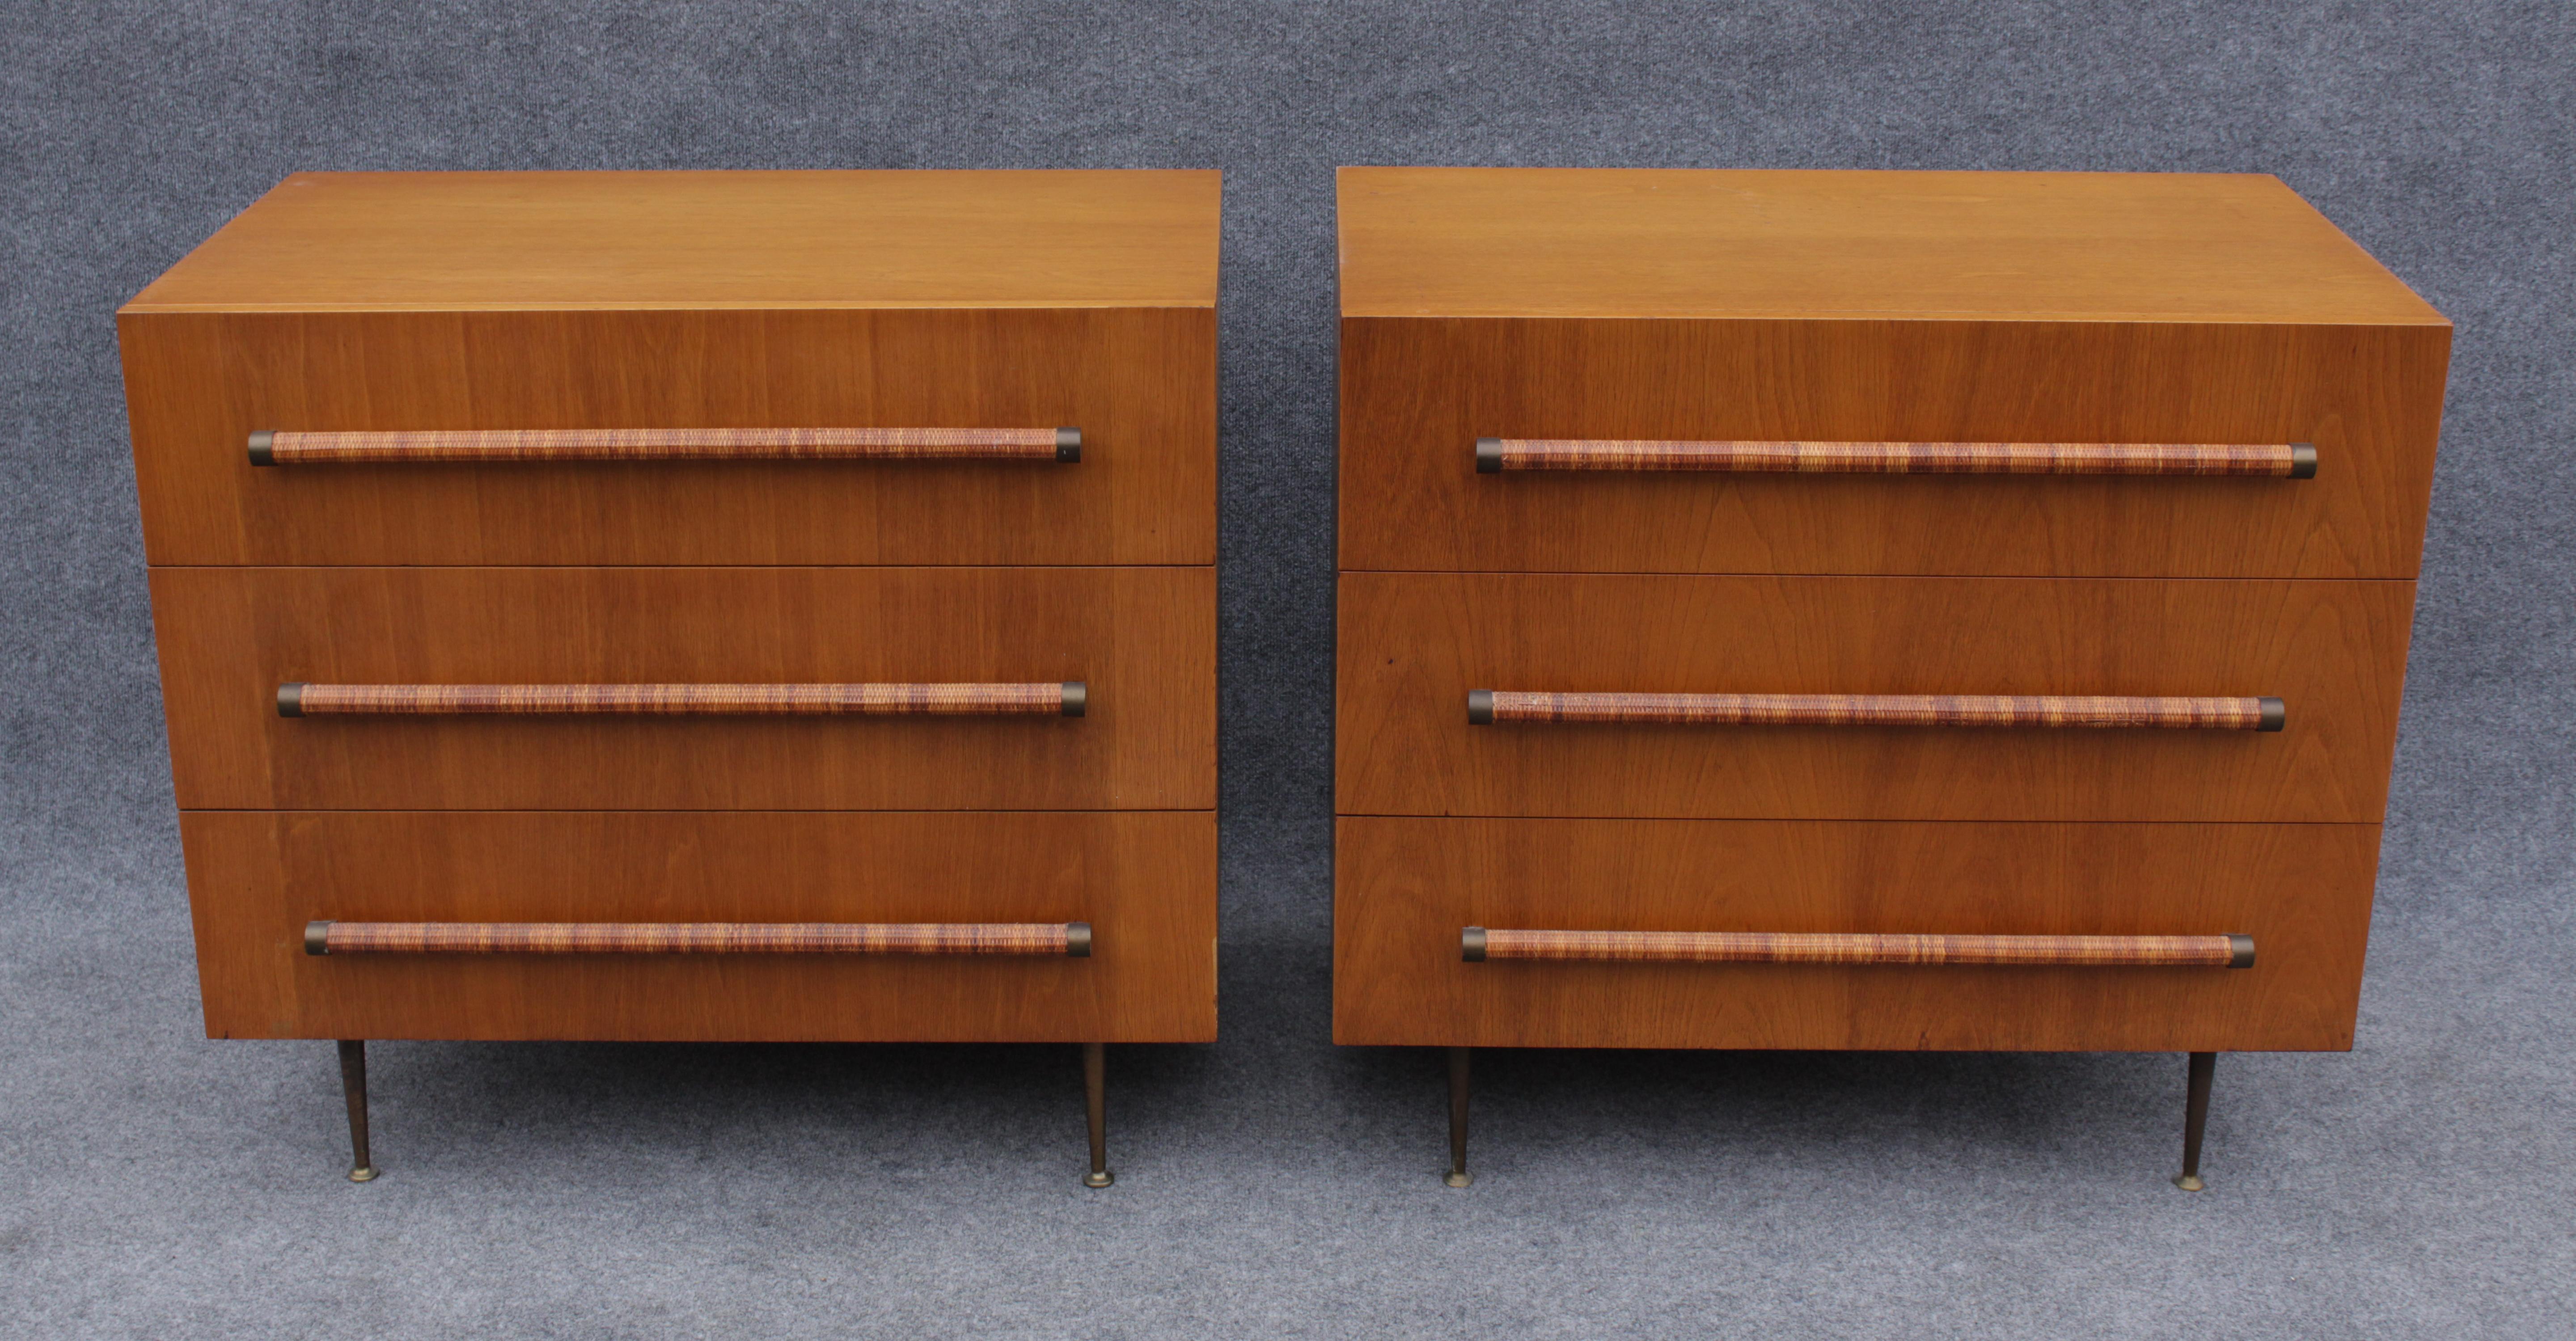 By American design legend T.H. Robsjohn Gibbings, these handsome dressers were made by Widdicomb, manufacturer of choice for many other historical designers. As expected of Widdicomb, the quality of these dressers is top-notch. Made of walnut, they